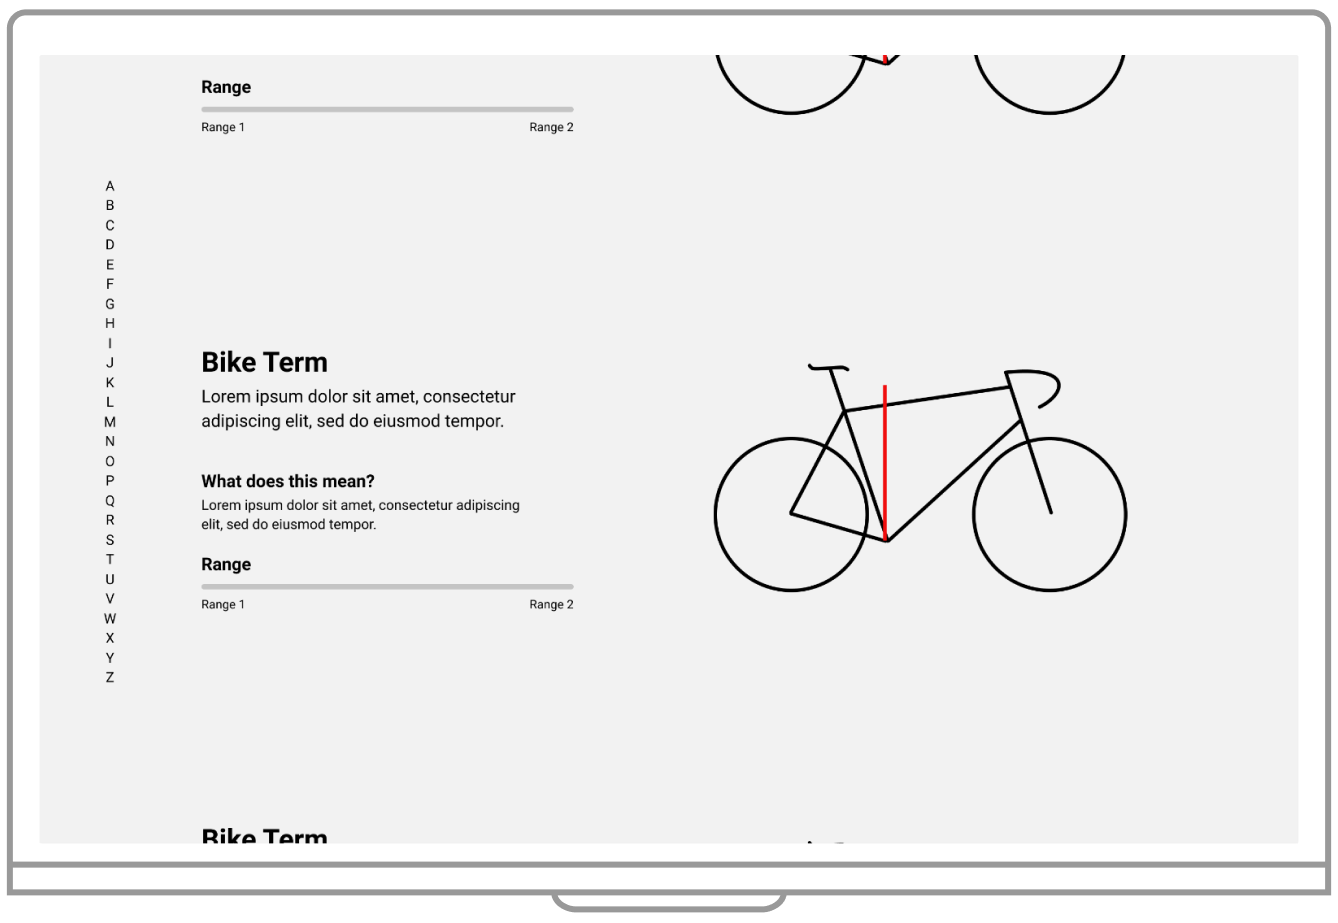 wireframe of bike terminology page.